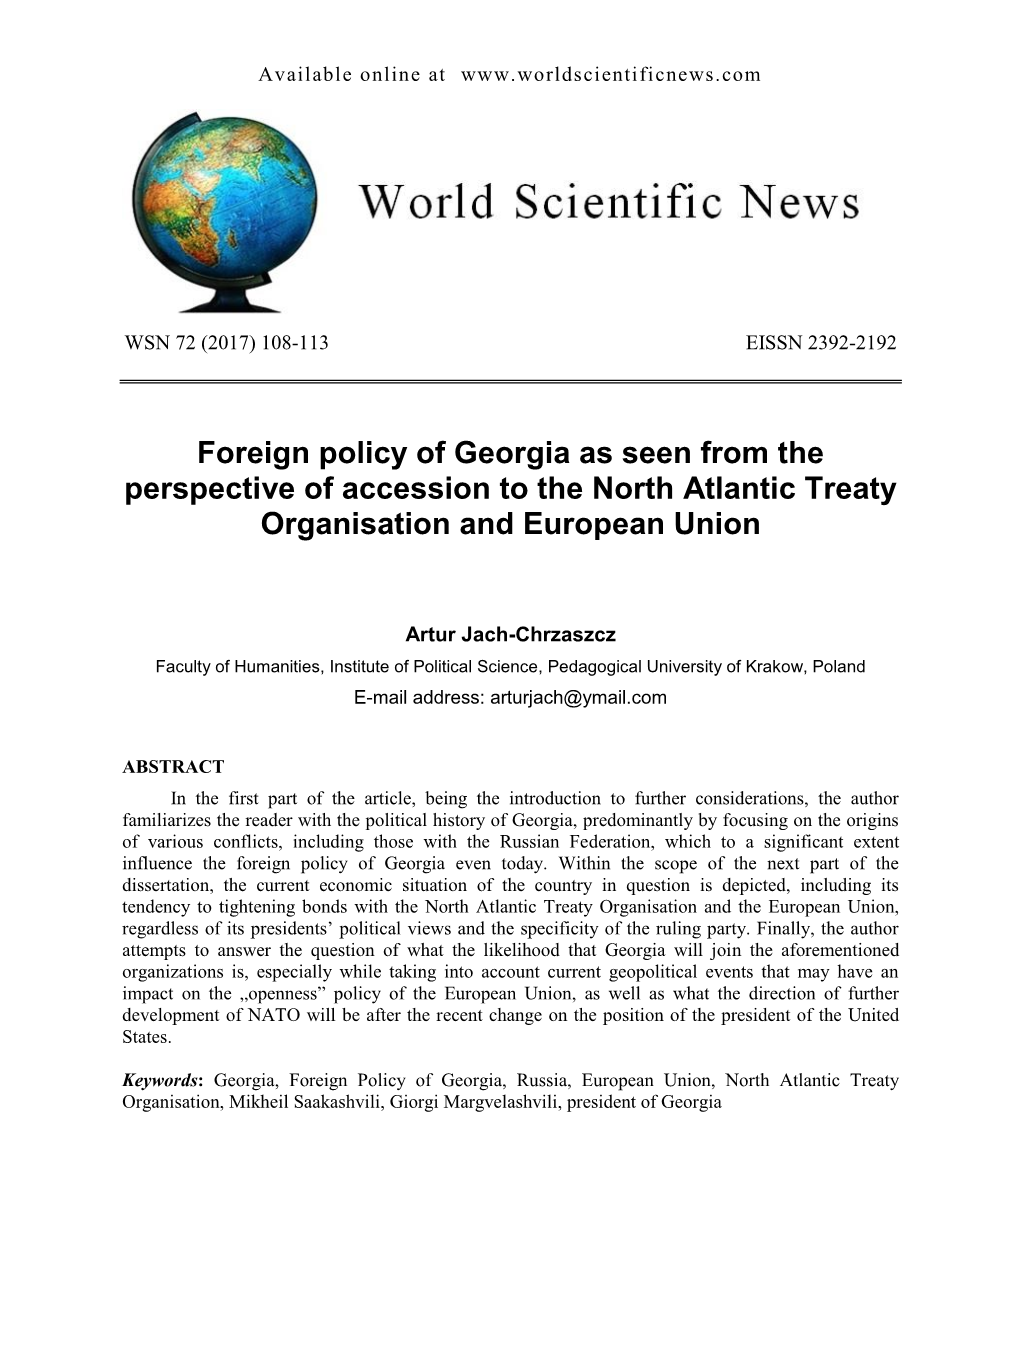 Foreign Policy of Georgia As Seen from the Perspective of Accession to the North Atlantic Treaty Organisation and European Union